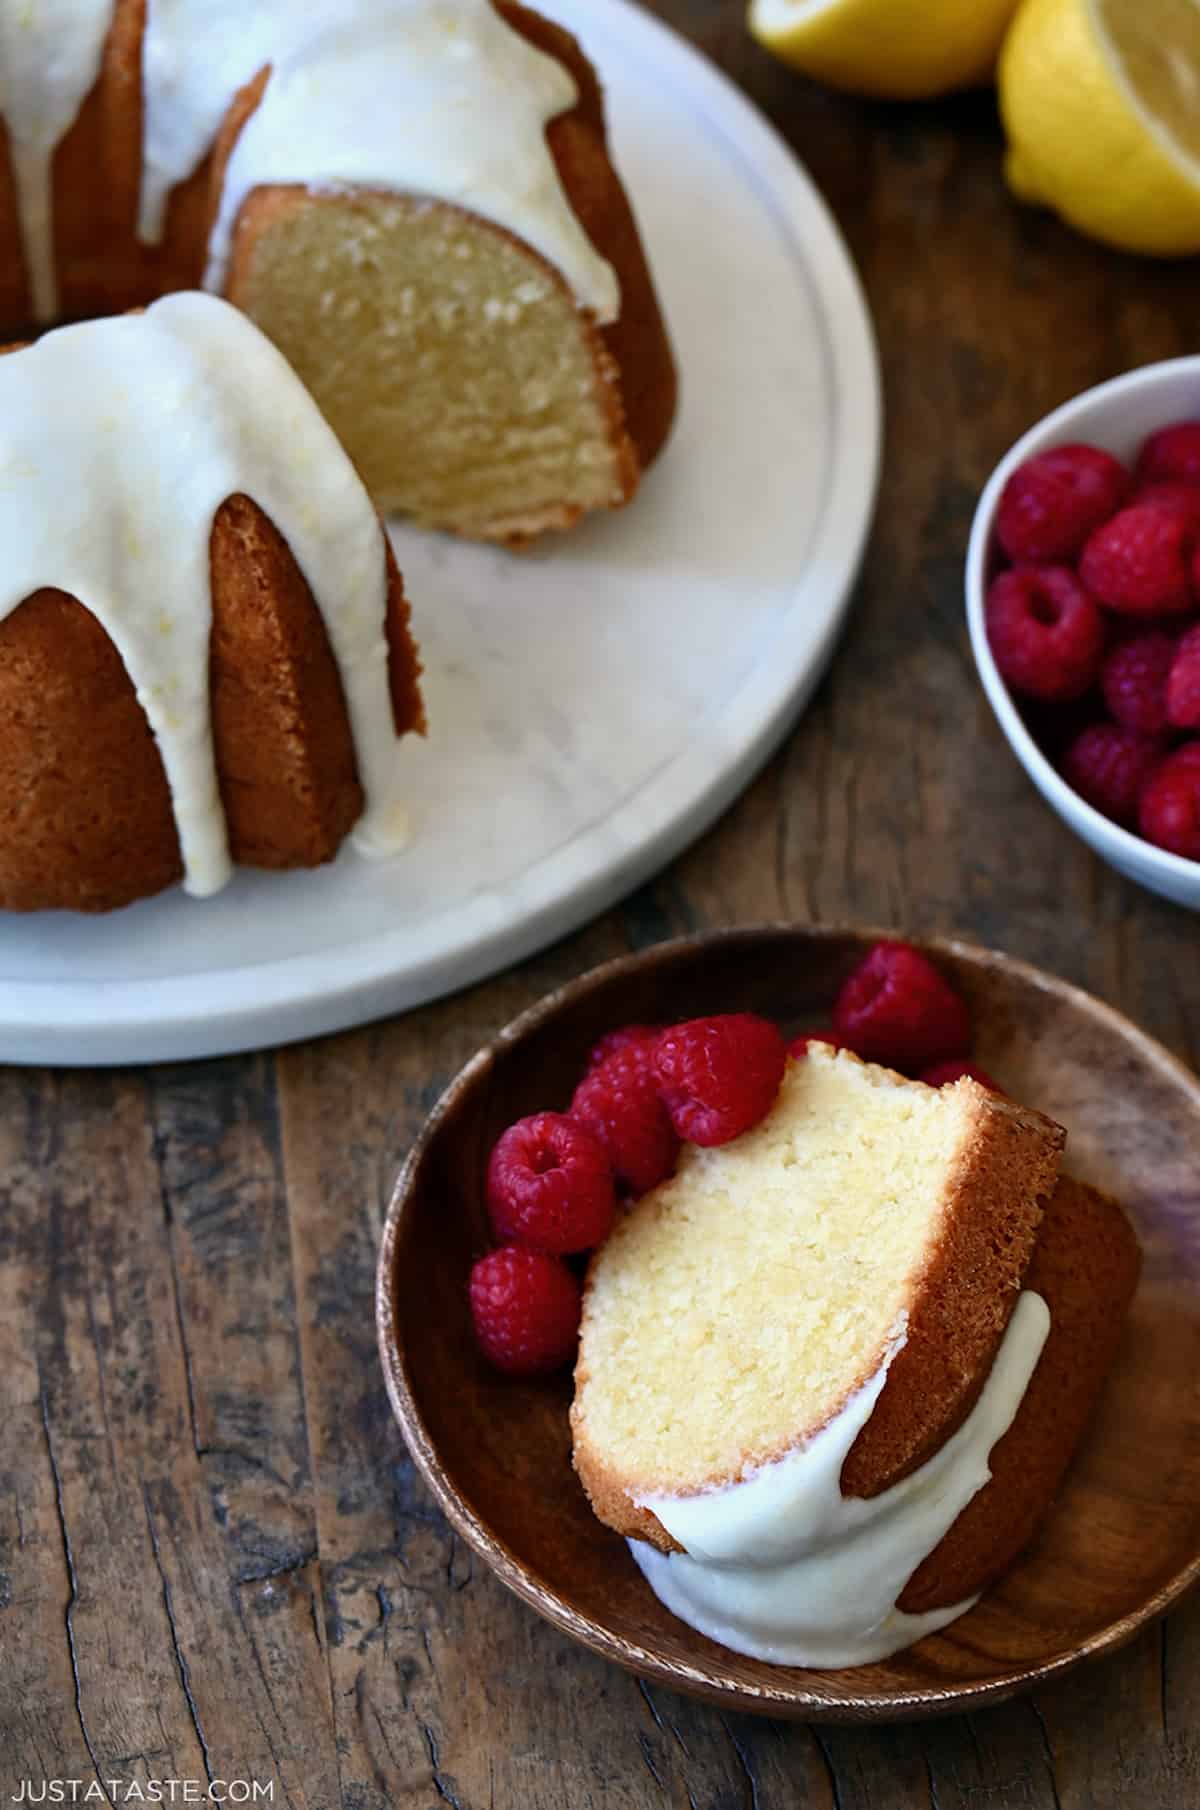 A slice of lemon cream cheese pound cake on a plate with fresh raspberries.